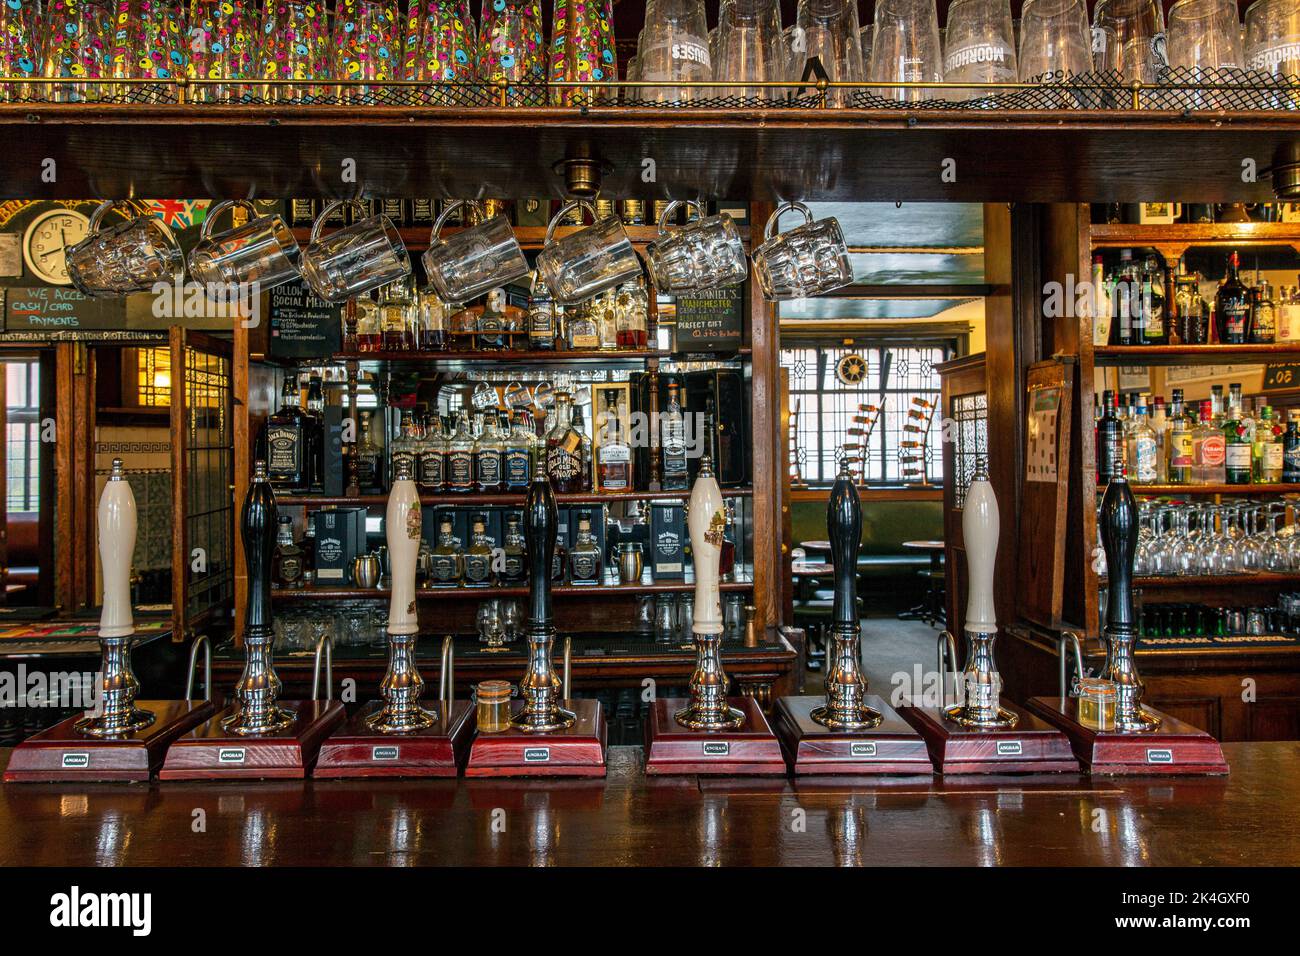 Inside the historic 'Briton's Protection' public house, Manchester, England, UK. Grade II listed. Stock Photo